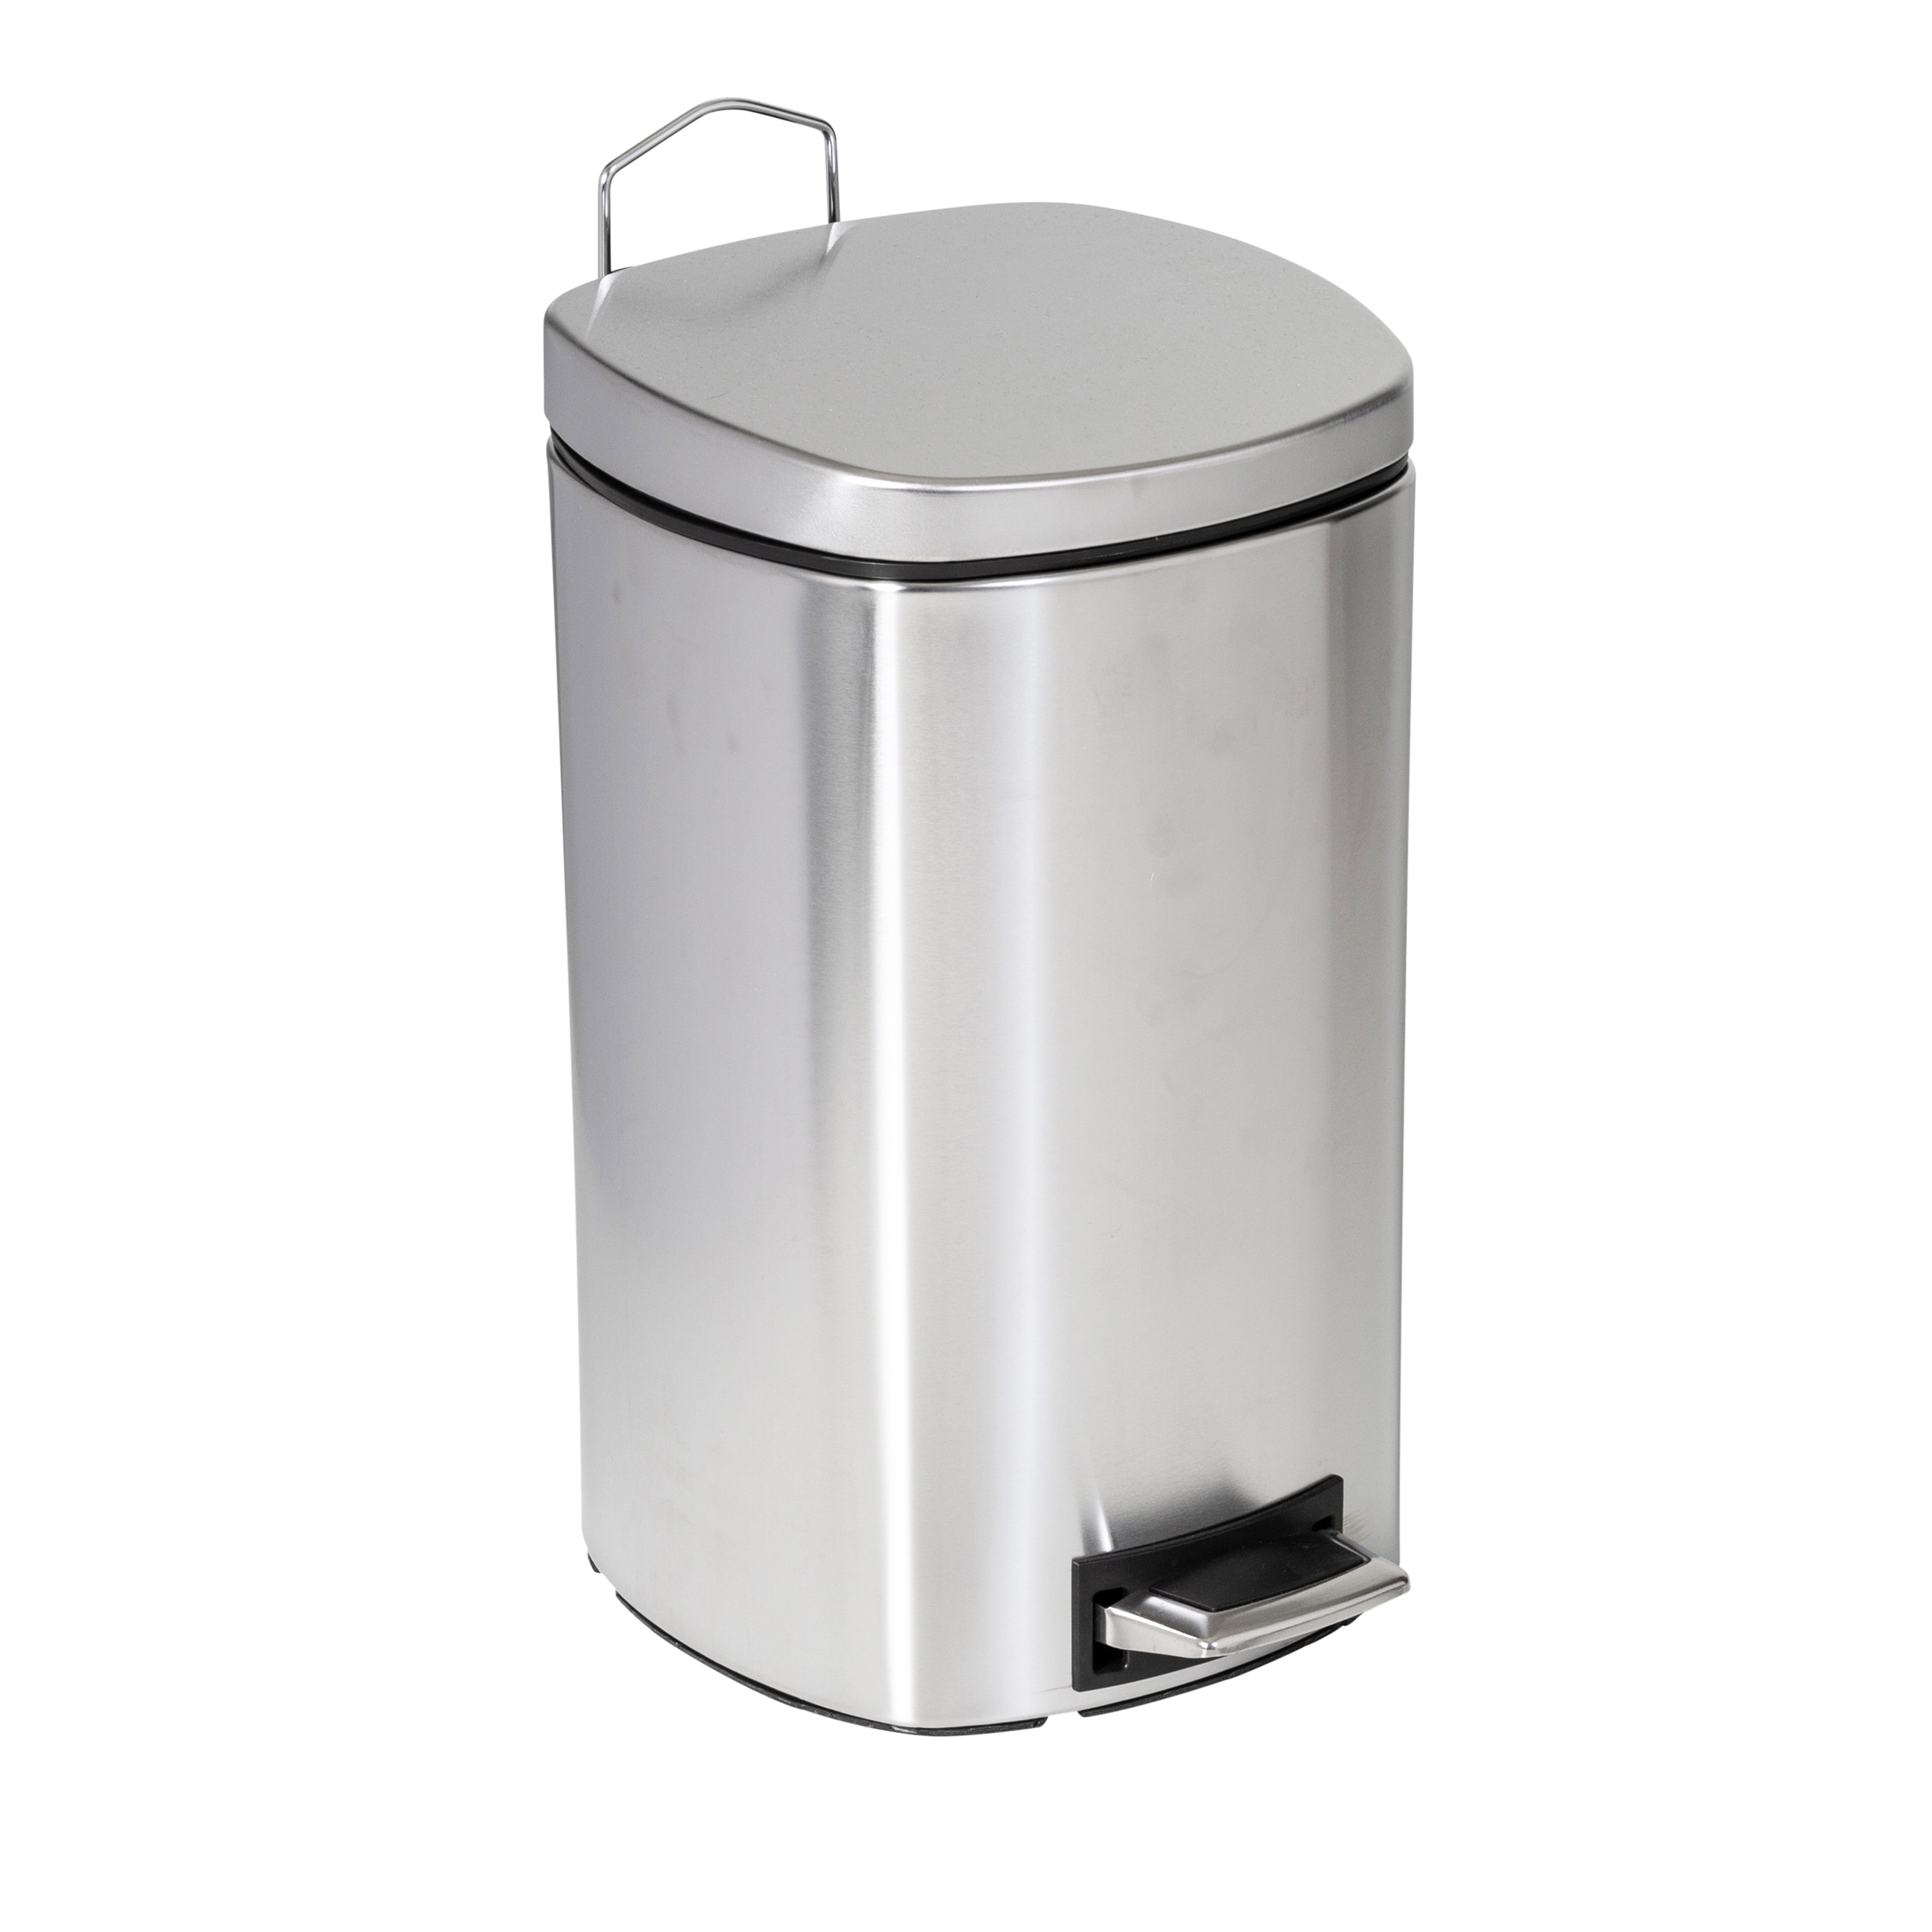 https://ak1.ostkcdn.com/images/products/is/images/direct/e40f6463e8a97aa6d4210df89197154a90d98323/Square-Stainless-Steel-Step-Trash-Can-with-Lid%2C-12-Liter.jpg